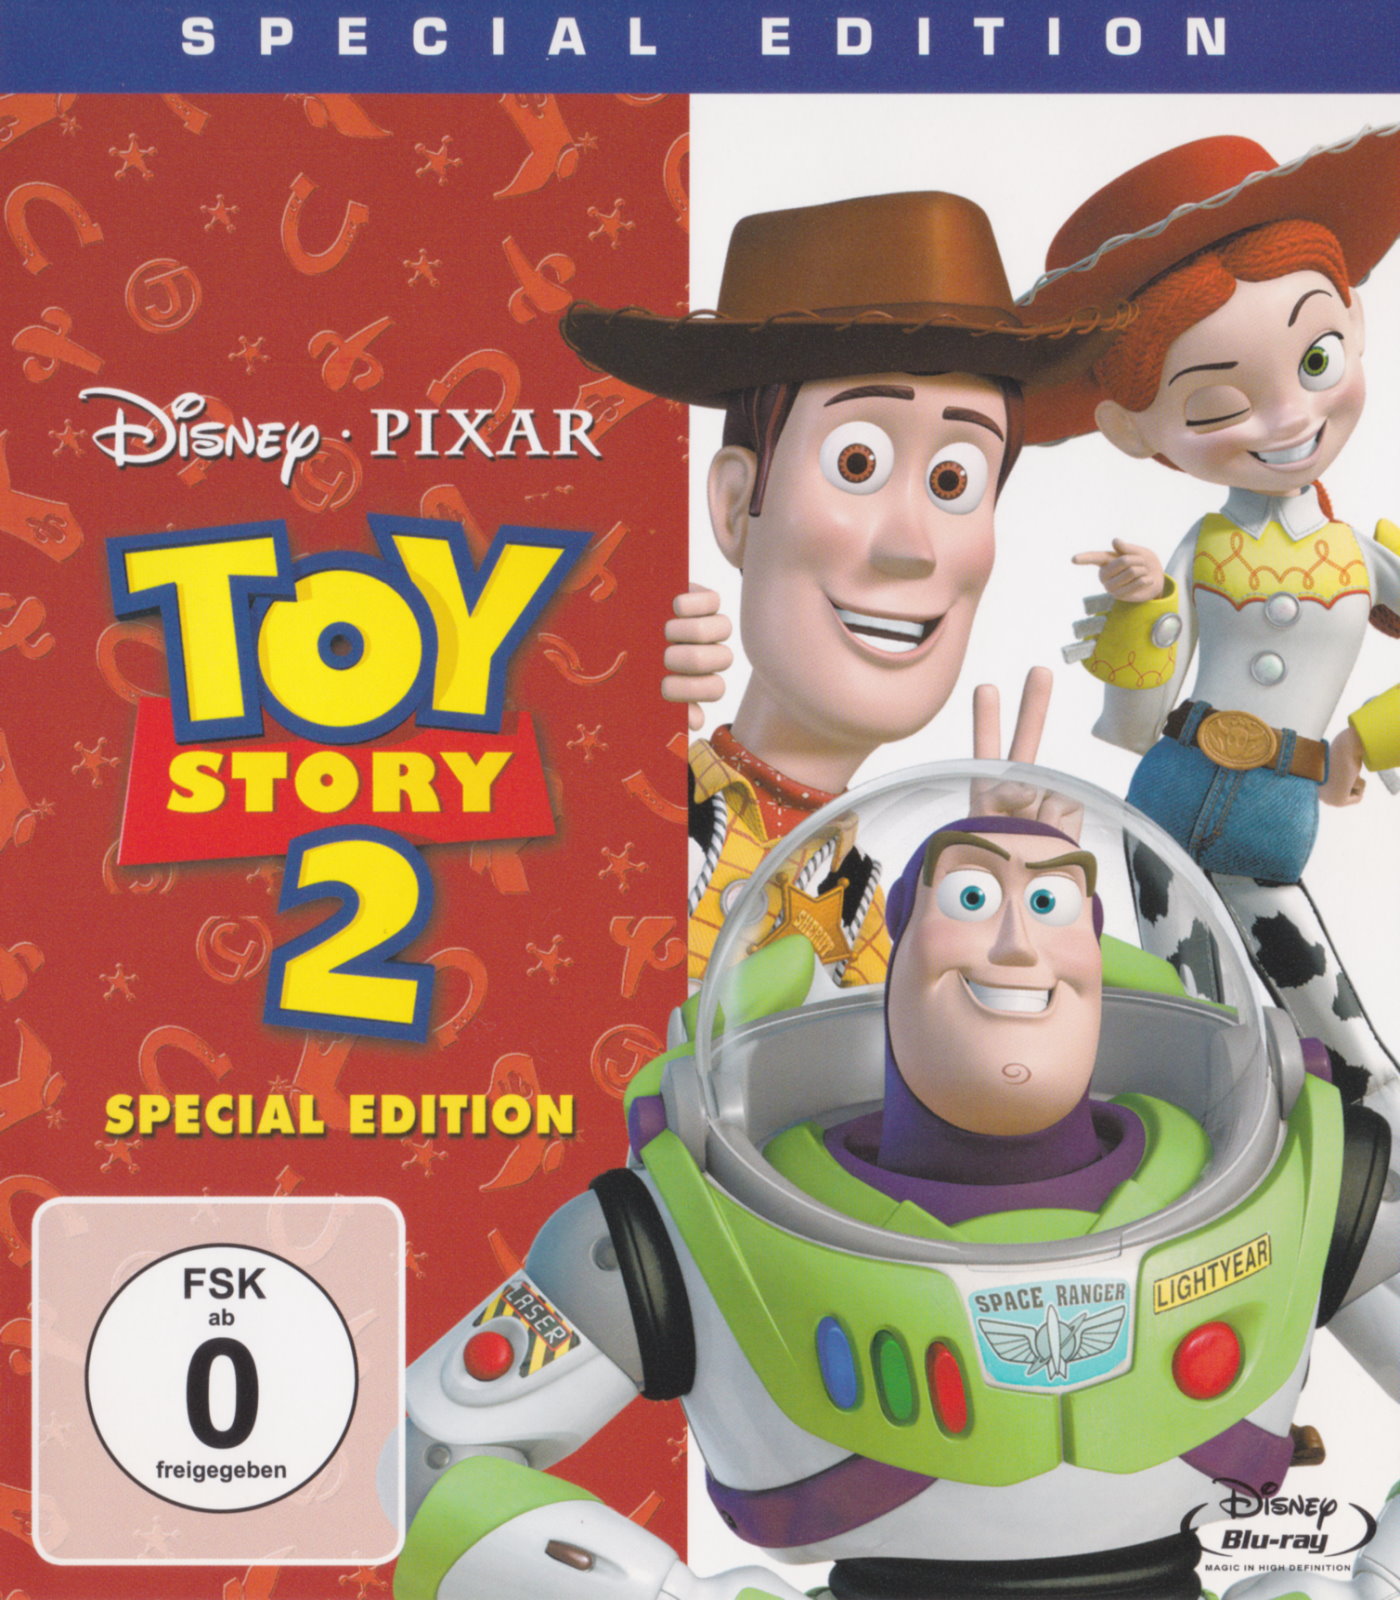 Cover - Toy Story 2.jpg